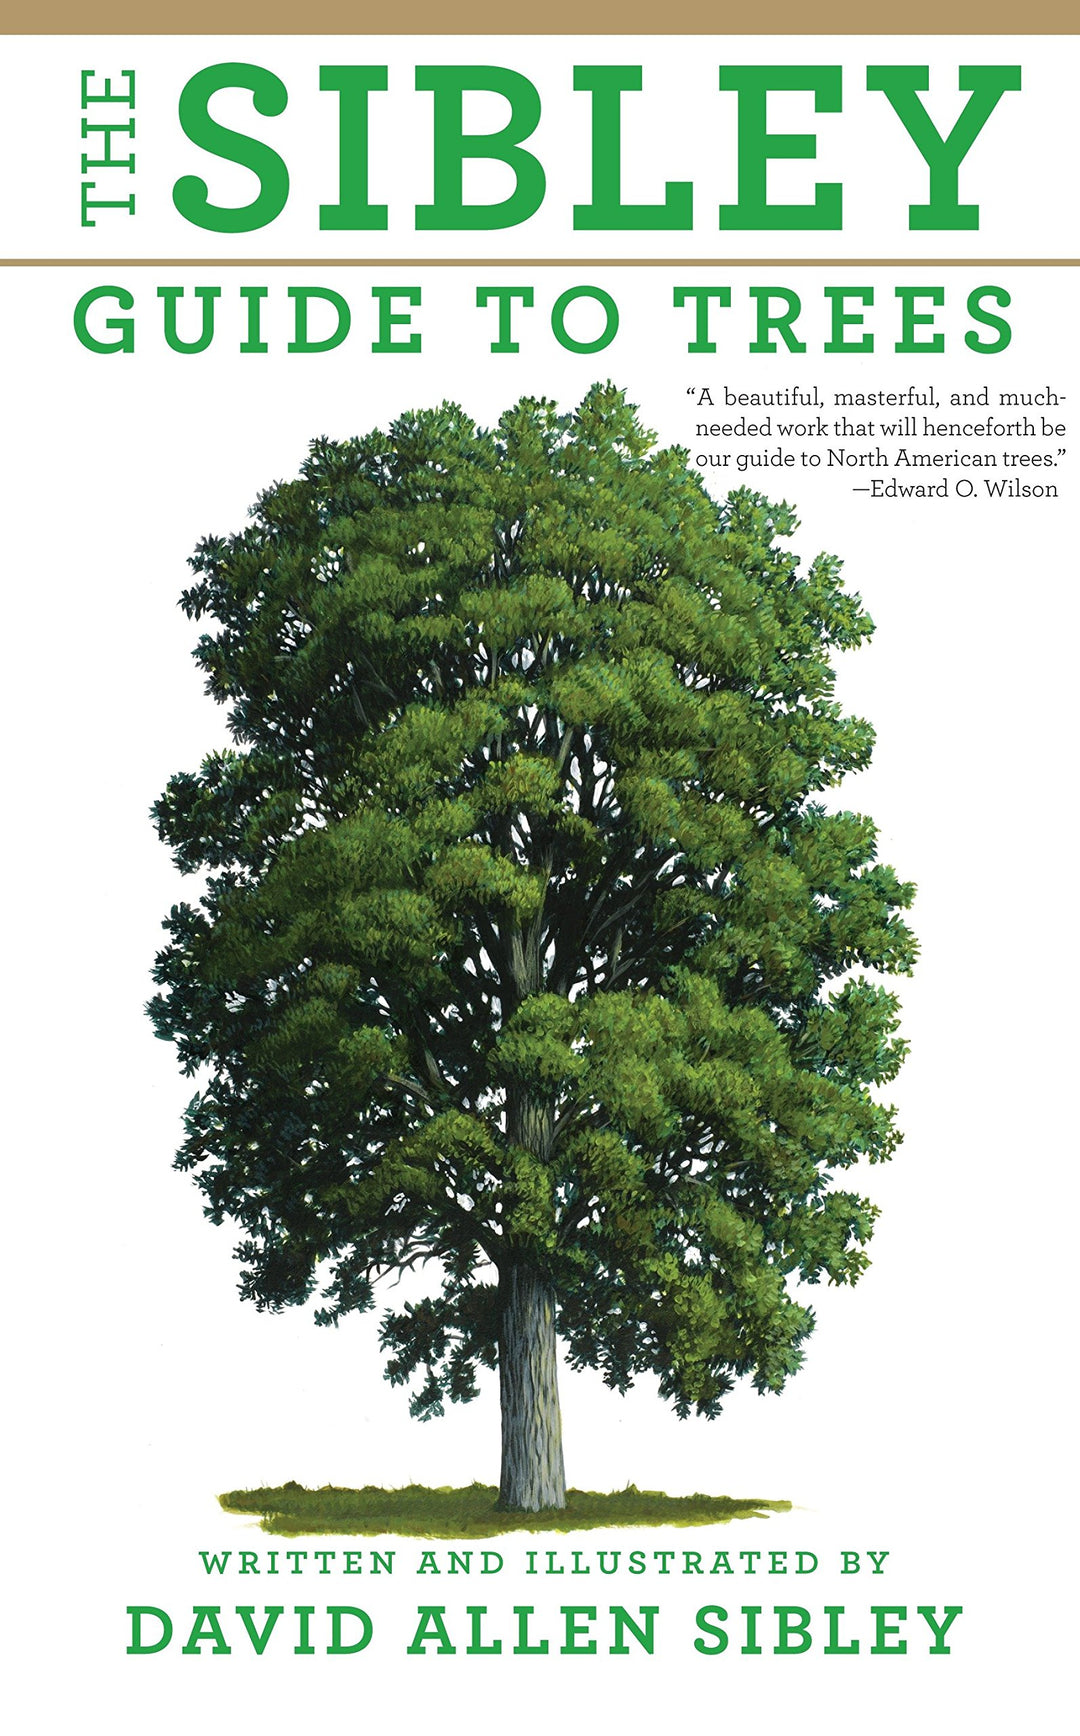 The Sibley Guide to Trees (Sibley Guides) by David Allen Sibley